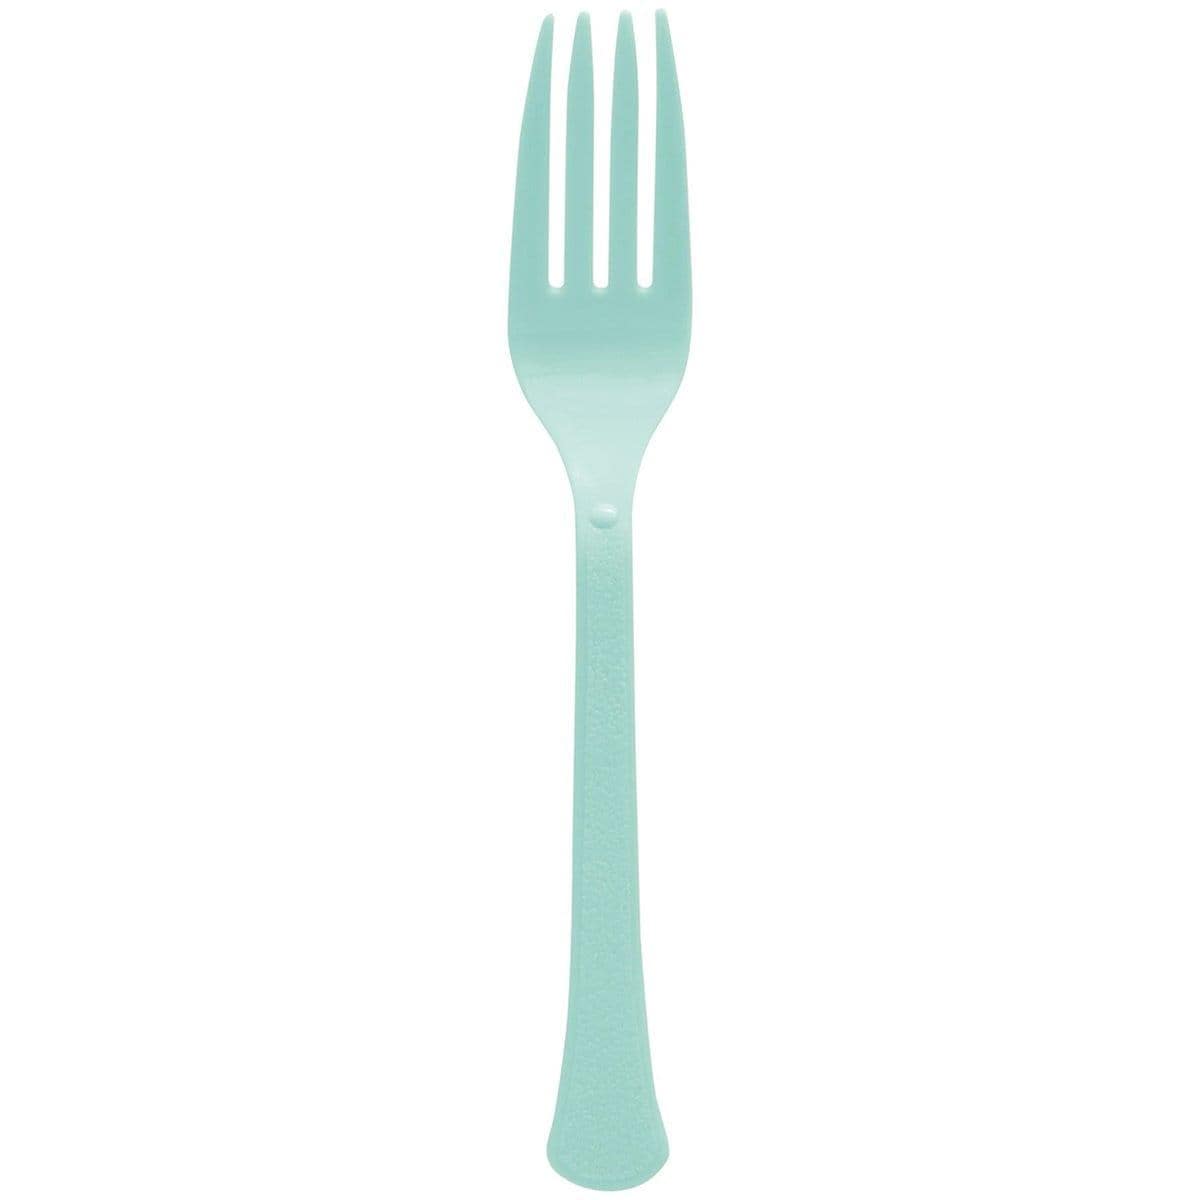 Buy Plasticware Robin's Egg Blue Plastic Forks, 20 Count sold at Party Expert